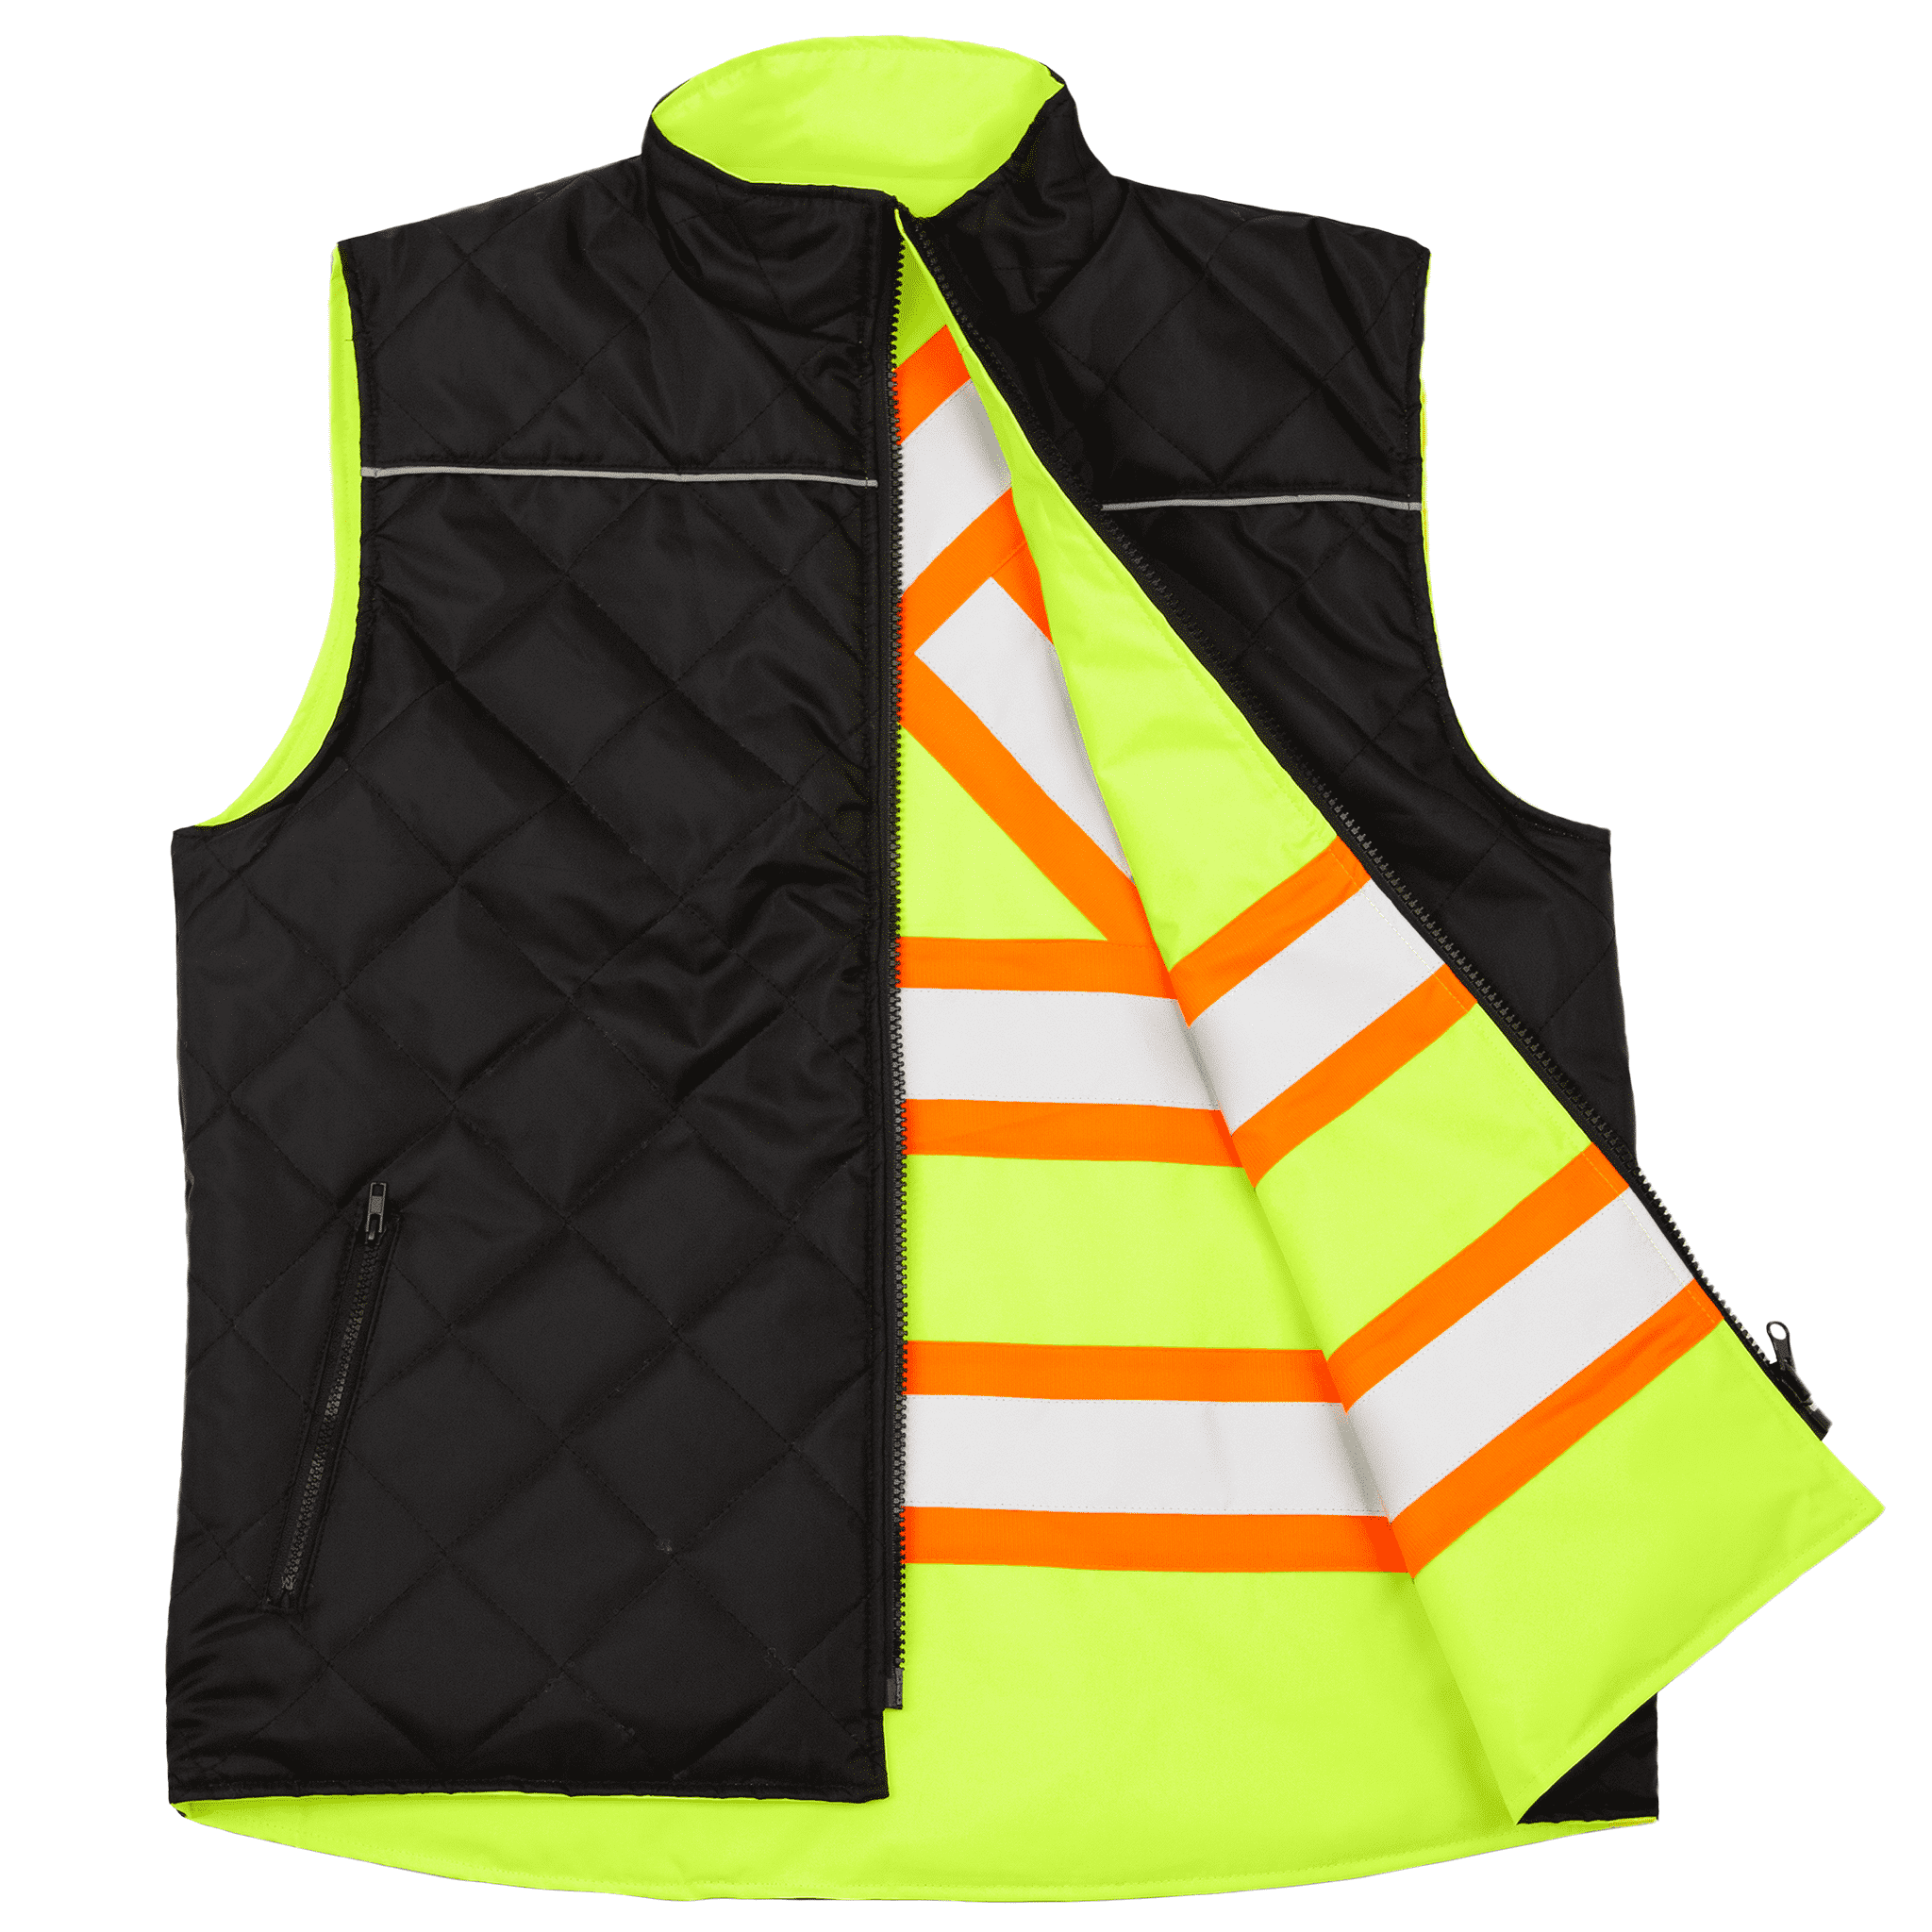 JORESTECH Hi-Vis Reversible Insulated Safety Vest, Two-Toned, ANSI Class 2,  VL-11 (L, Lime) 